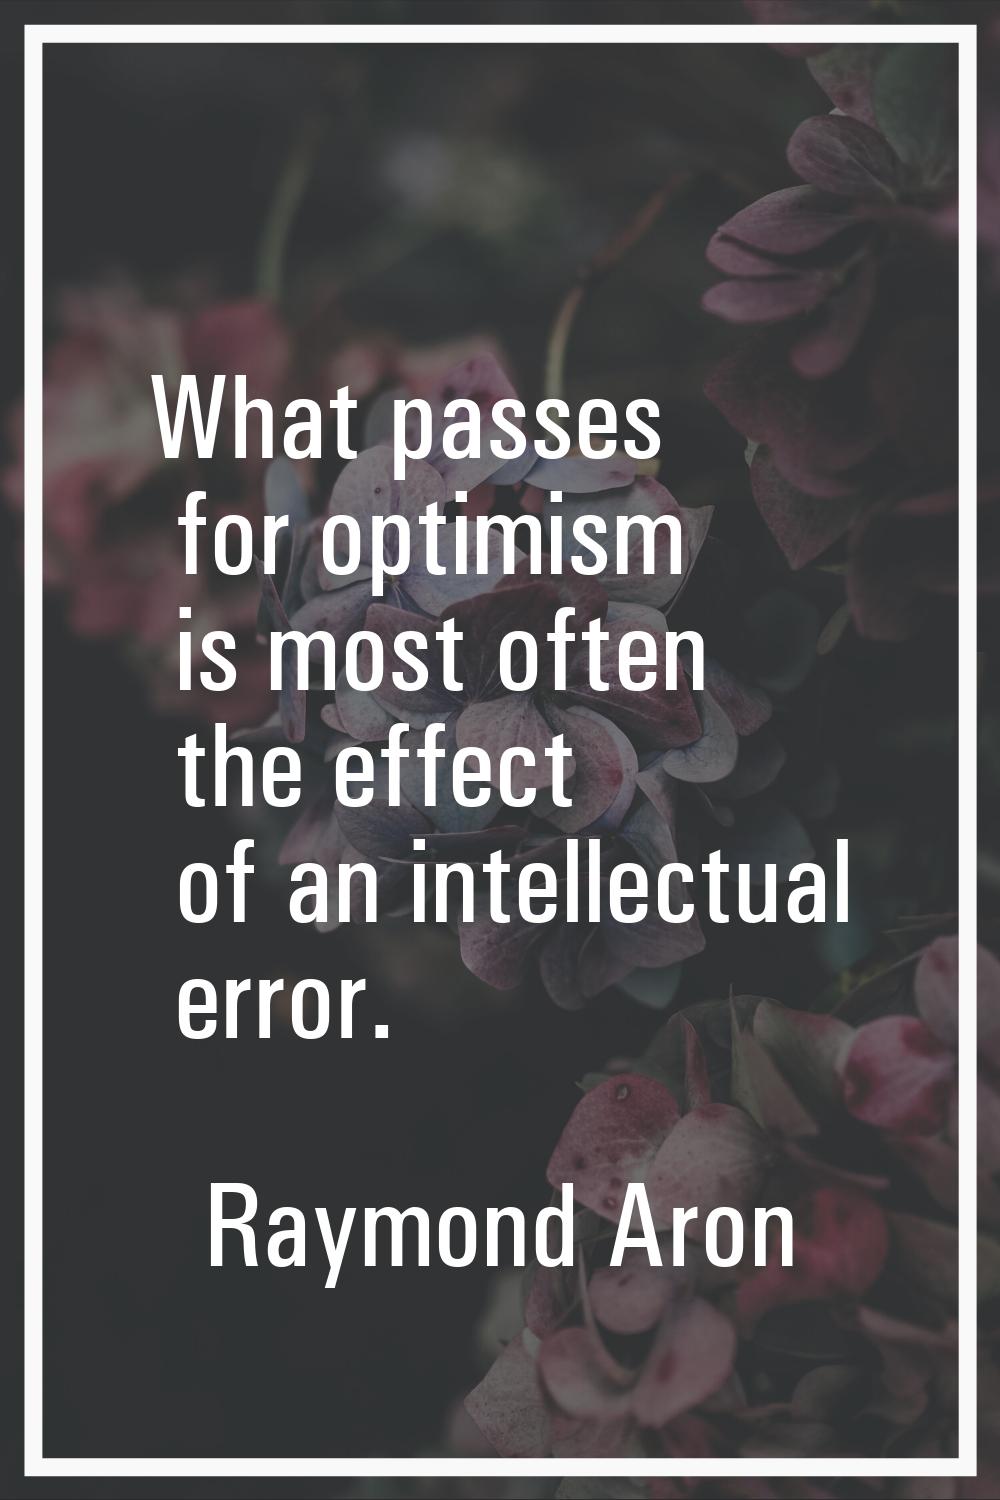 What passes for optimism is most often the effect of an intellectual error.